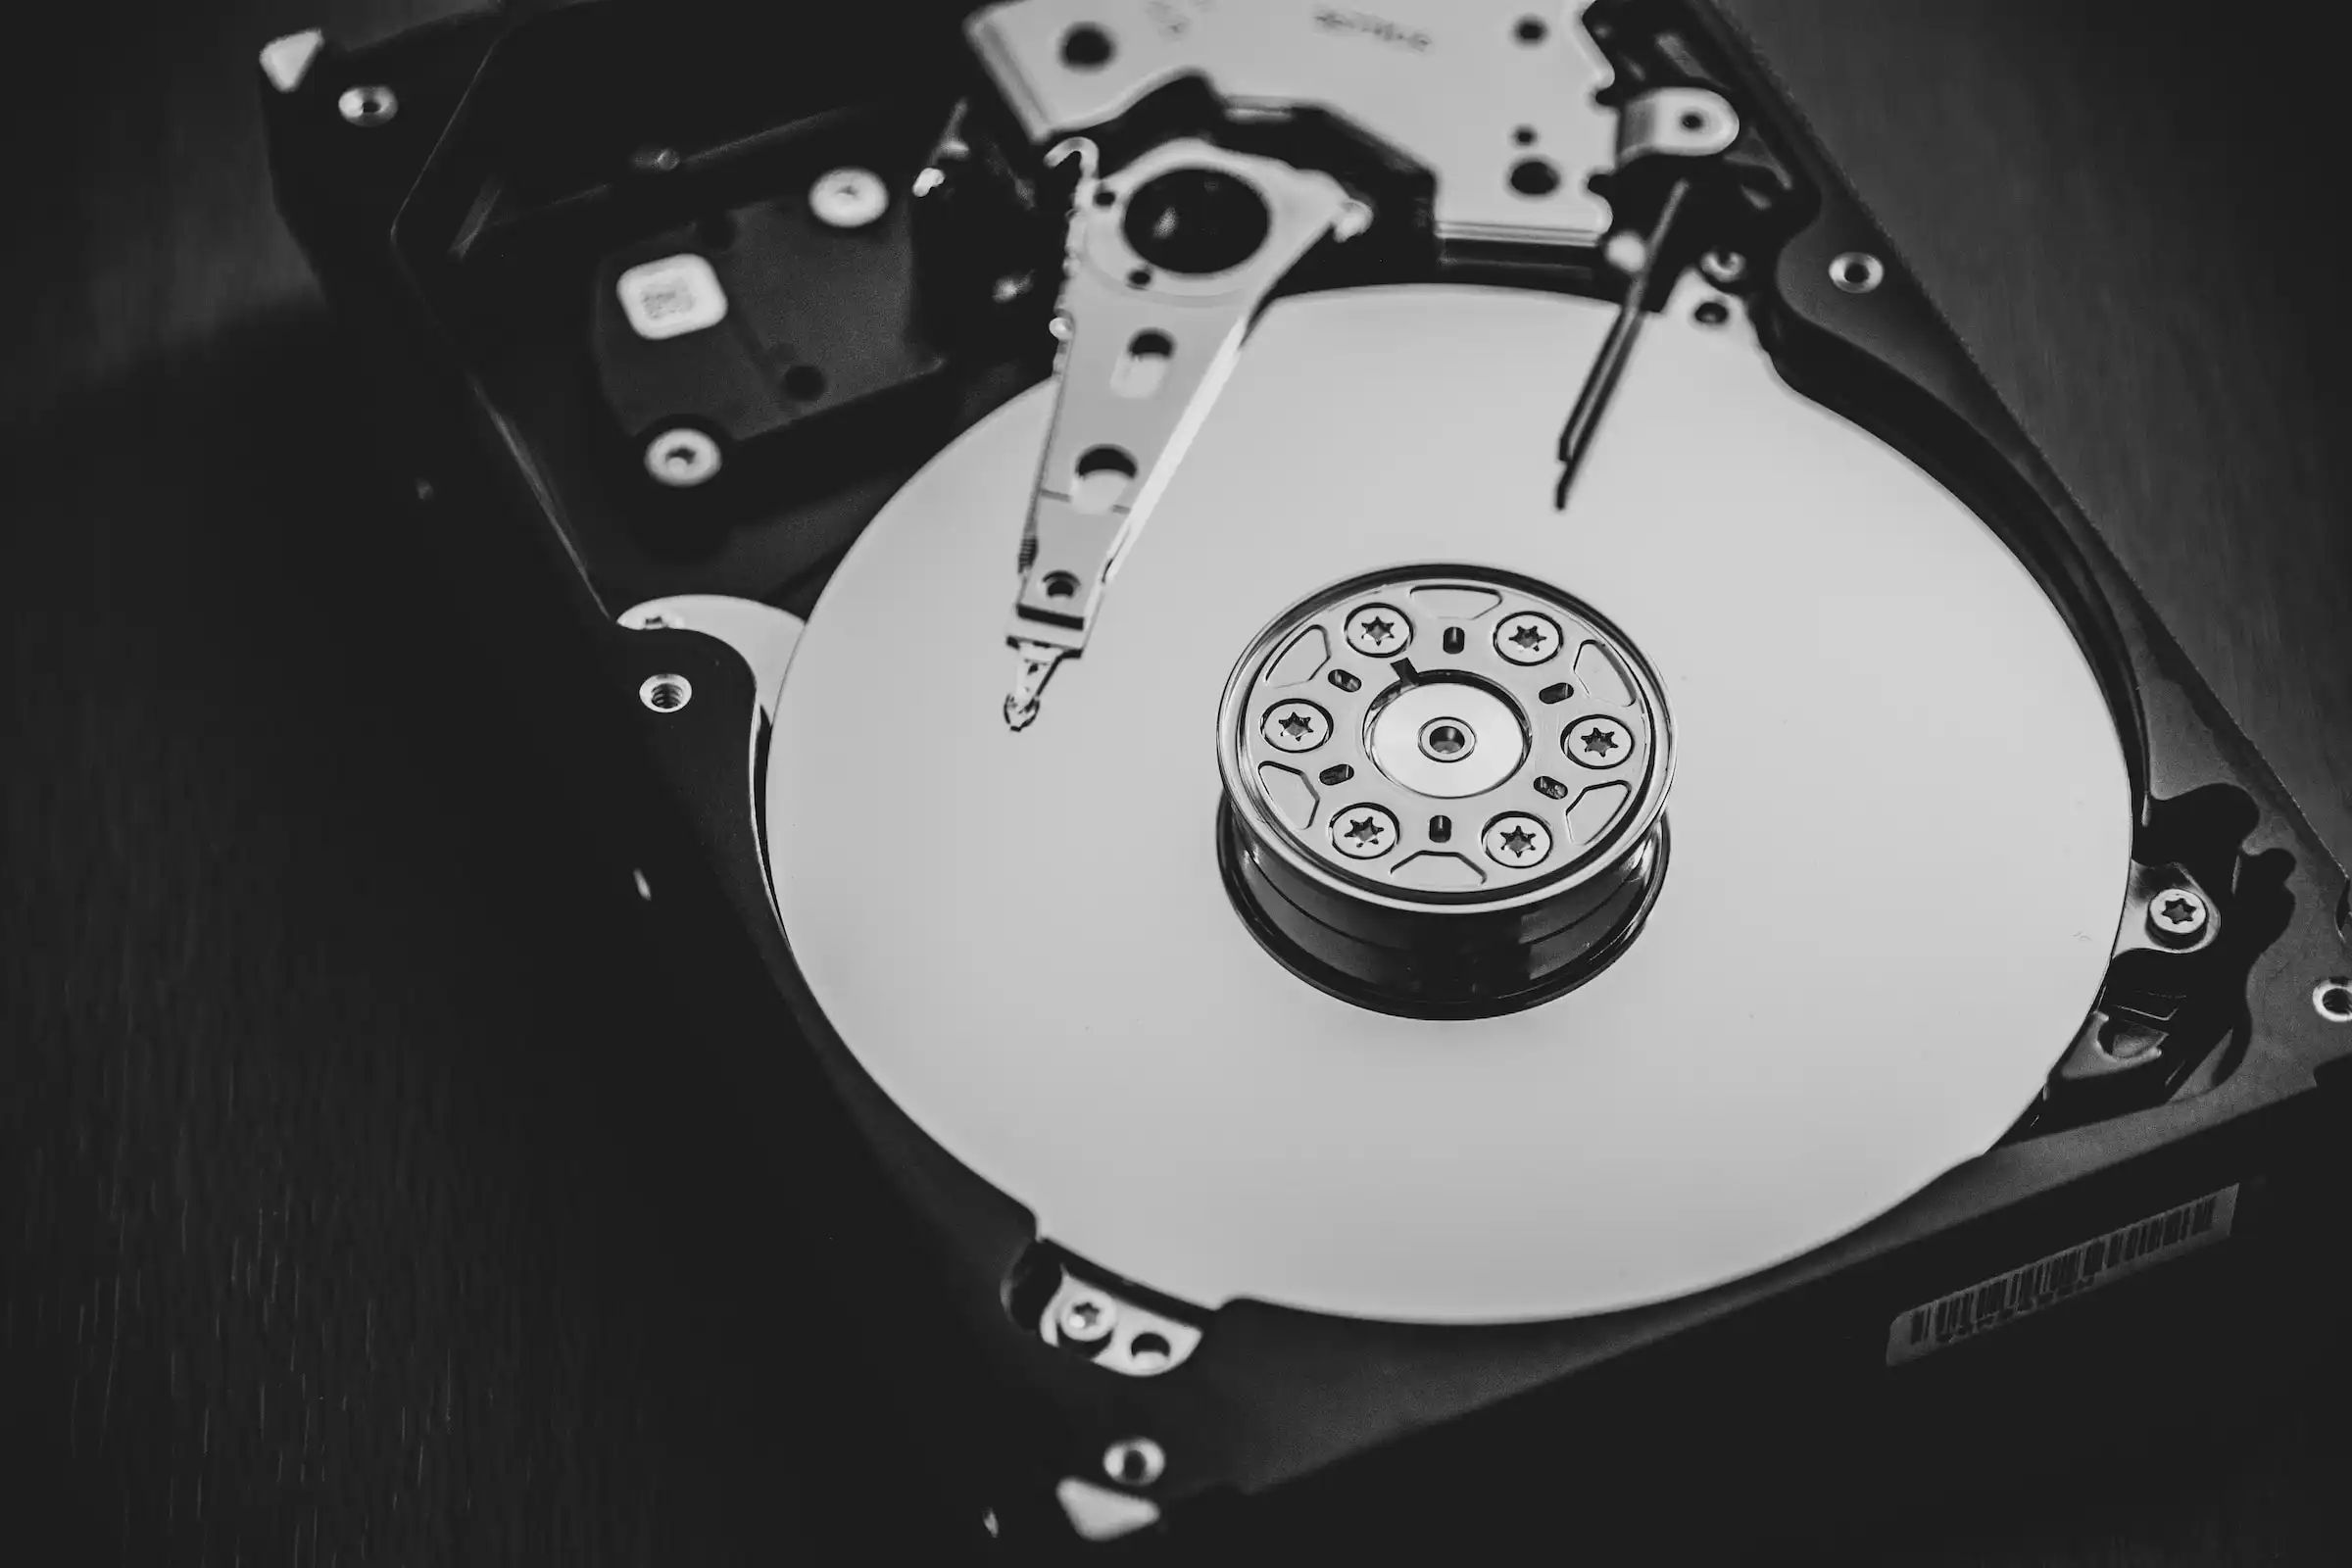 How To Use My Hard Disk Drive